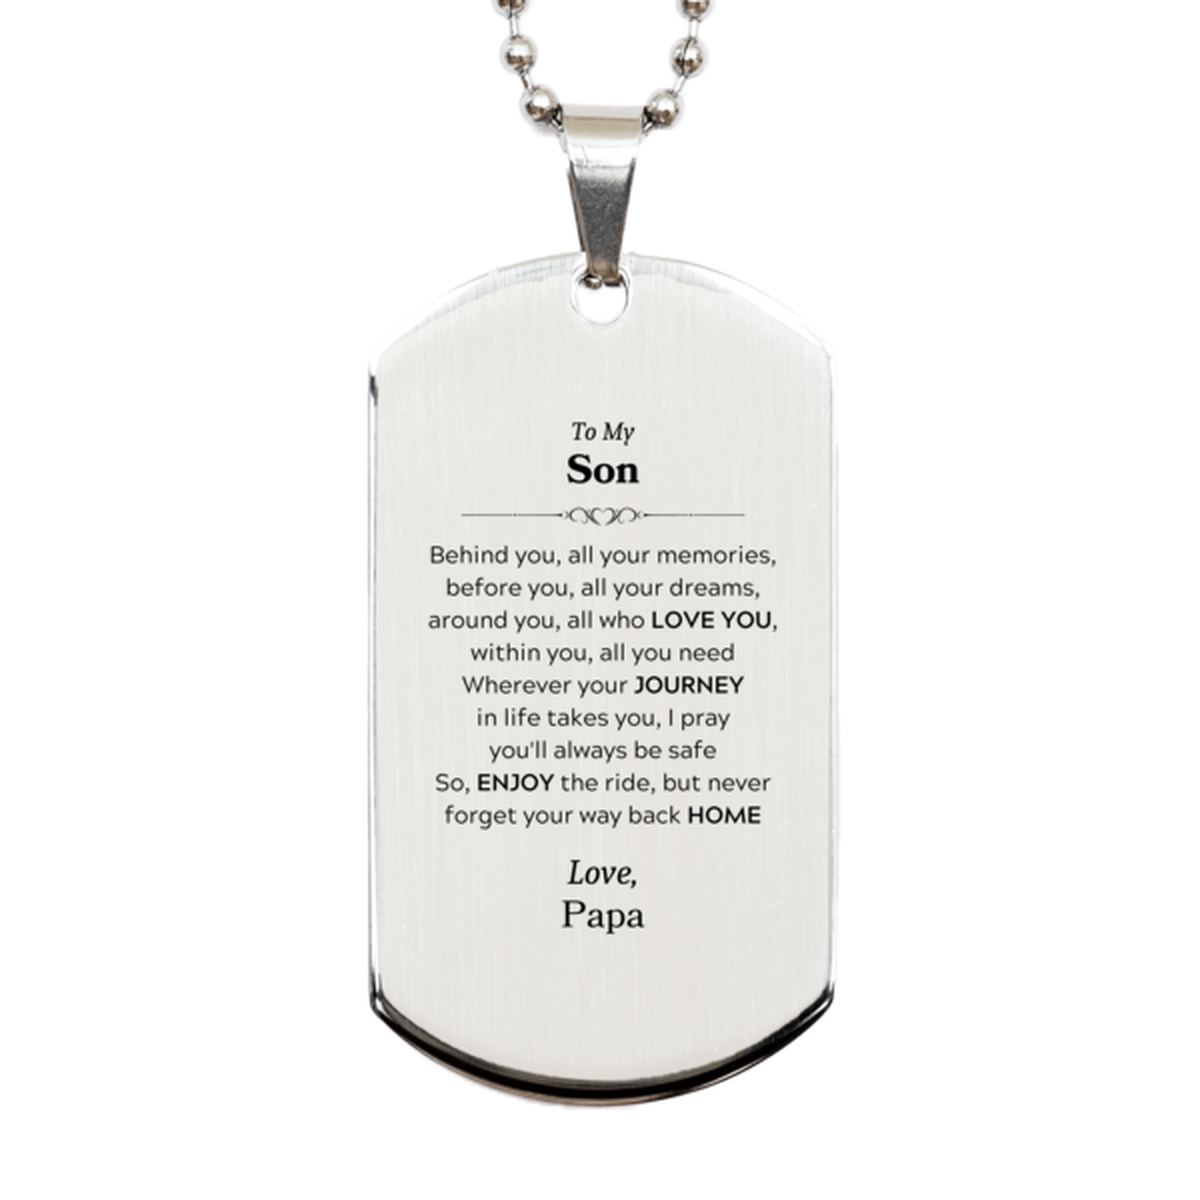 To My Son Graduation Gifts from Papa, Son Silver Dog Tag Christmas Birthday Gifts for Son Behind you, all your memories, before you, all your dreams. Love, Papa